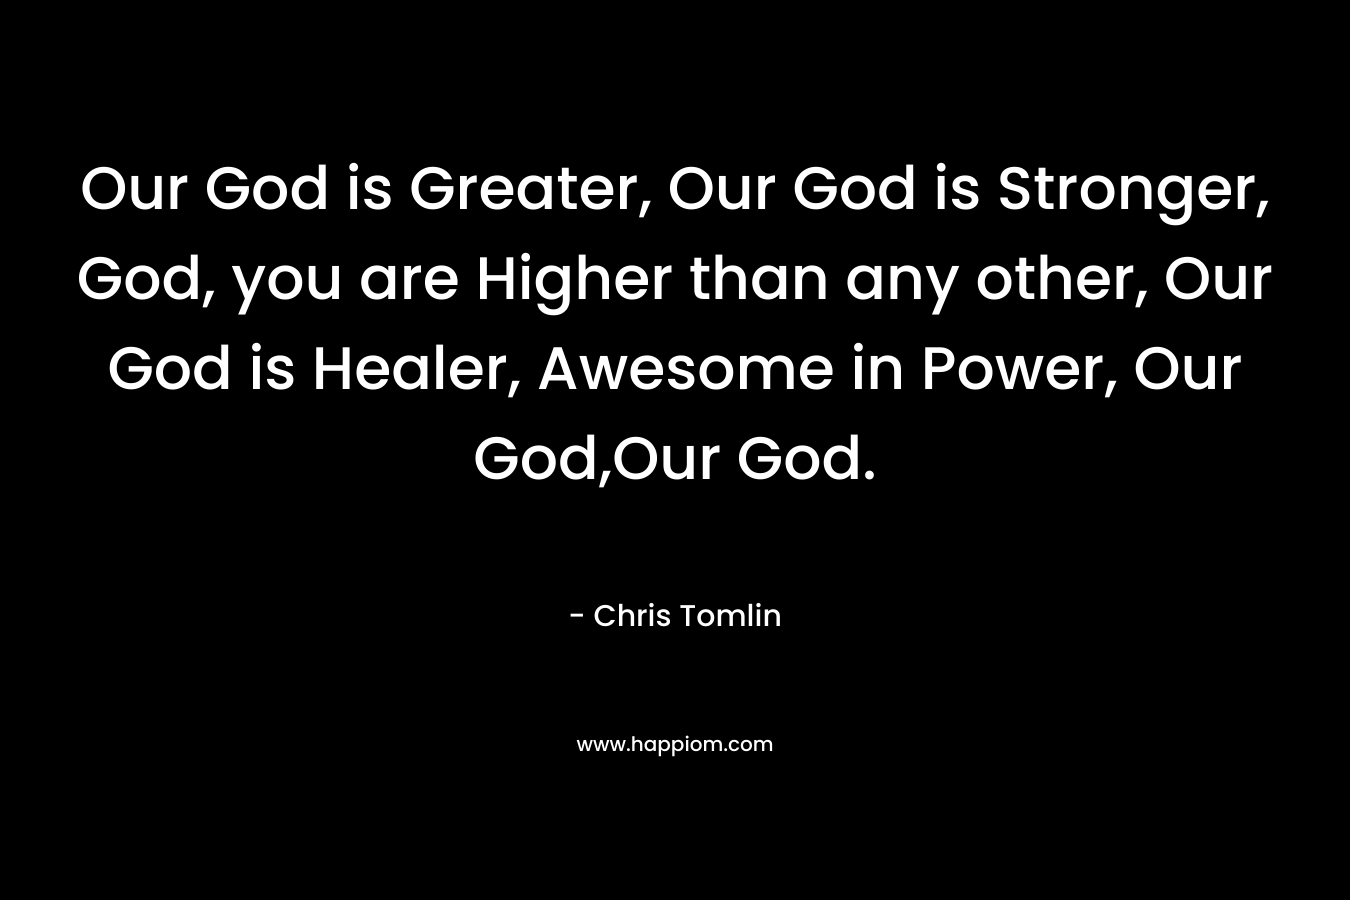 Our God is Greater, Our God is Stronger, God, you are Higher than any other, Our God is Healer, Awesome in Power, Our God,Our God.